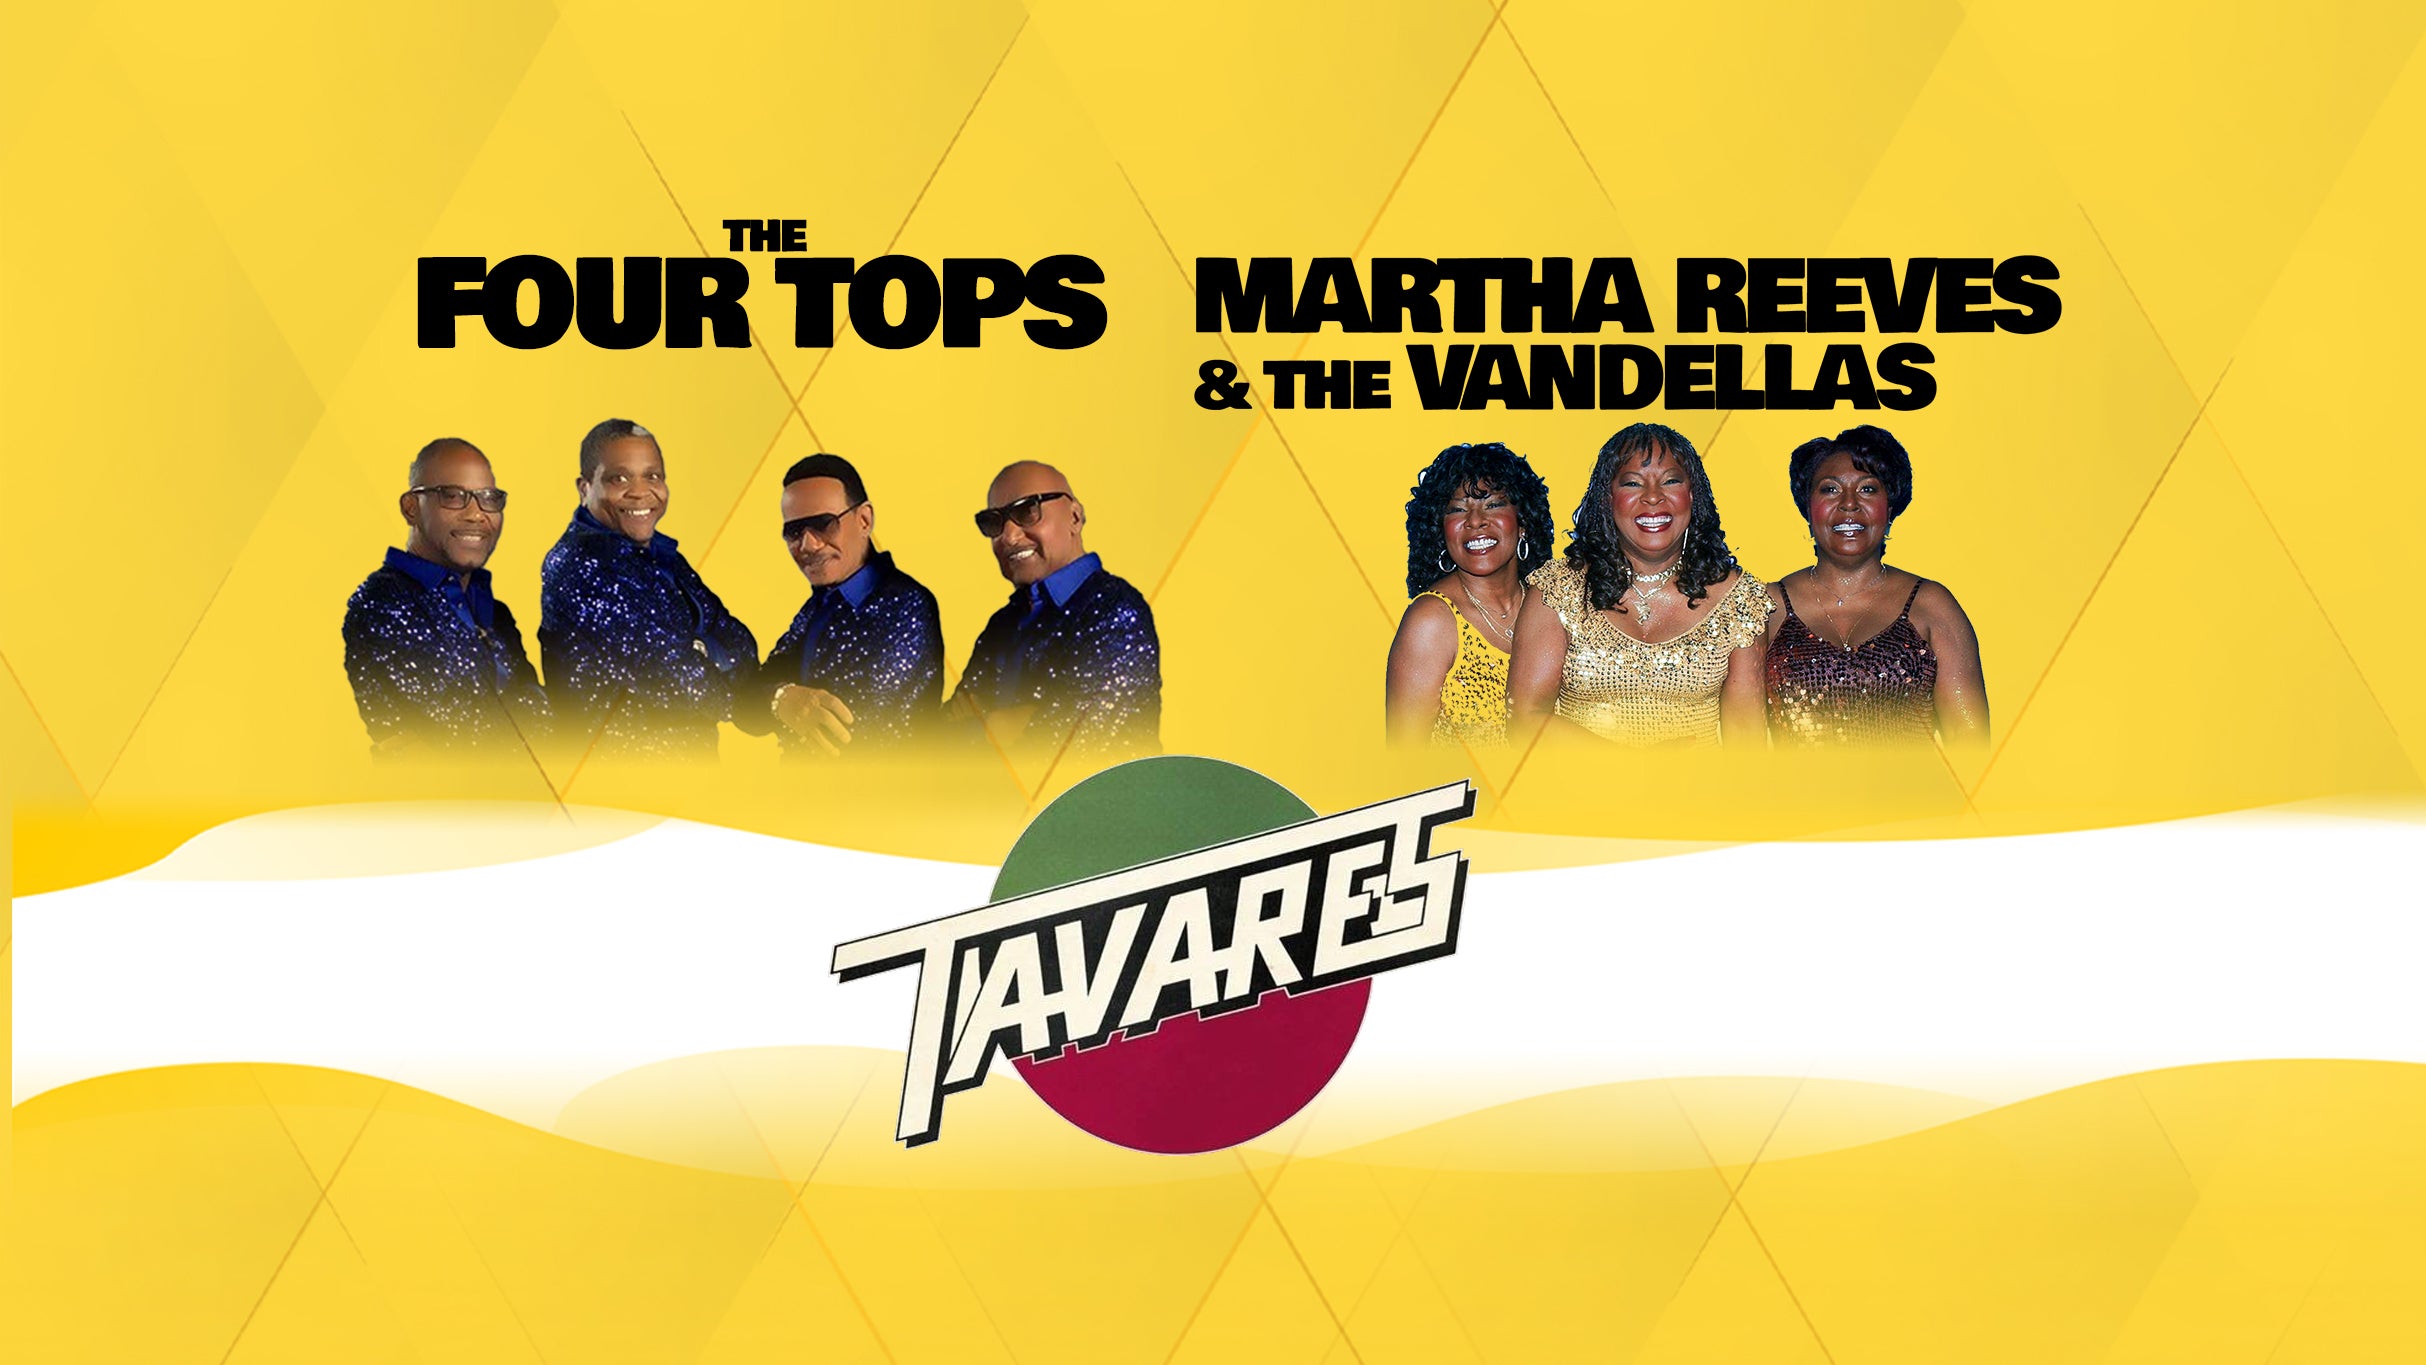 The Four Tops / Tavares / Martha Reeves & the Vandellas in Manchester promo photo for Priority from O2 presale offer code